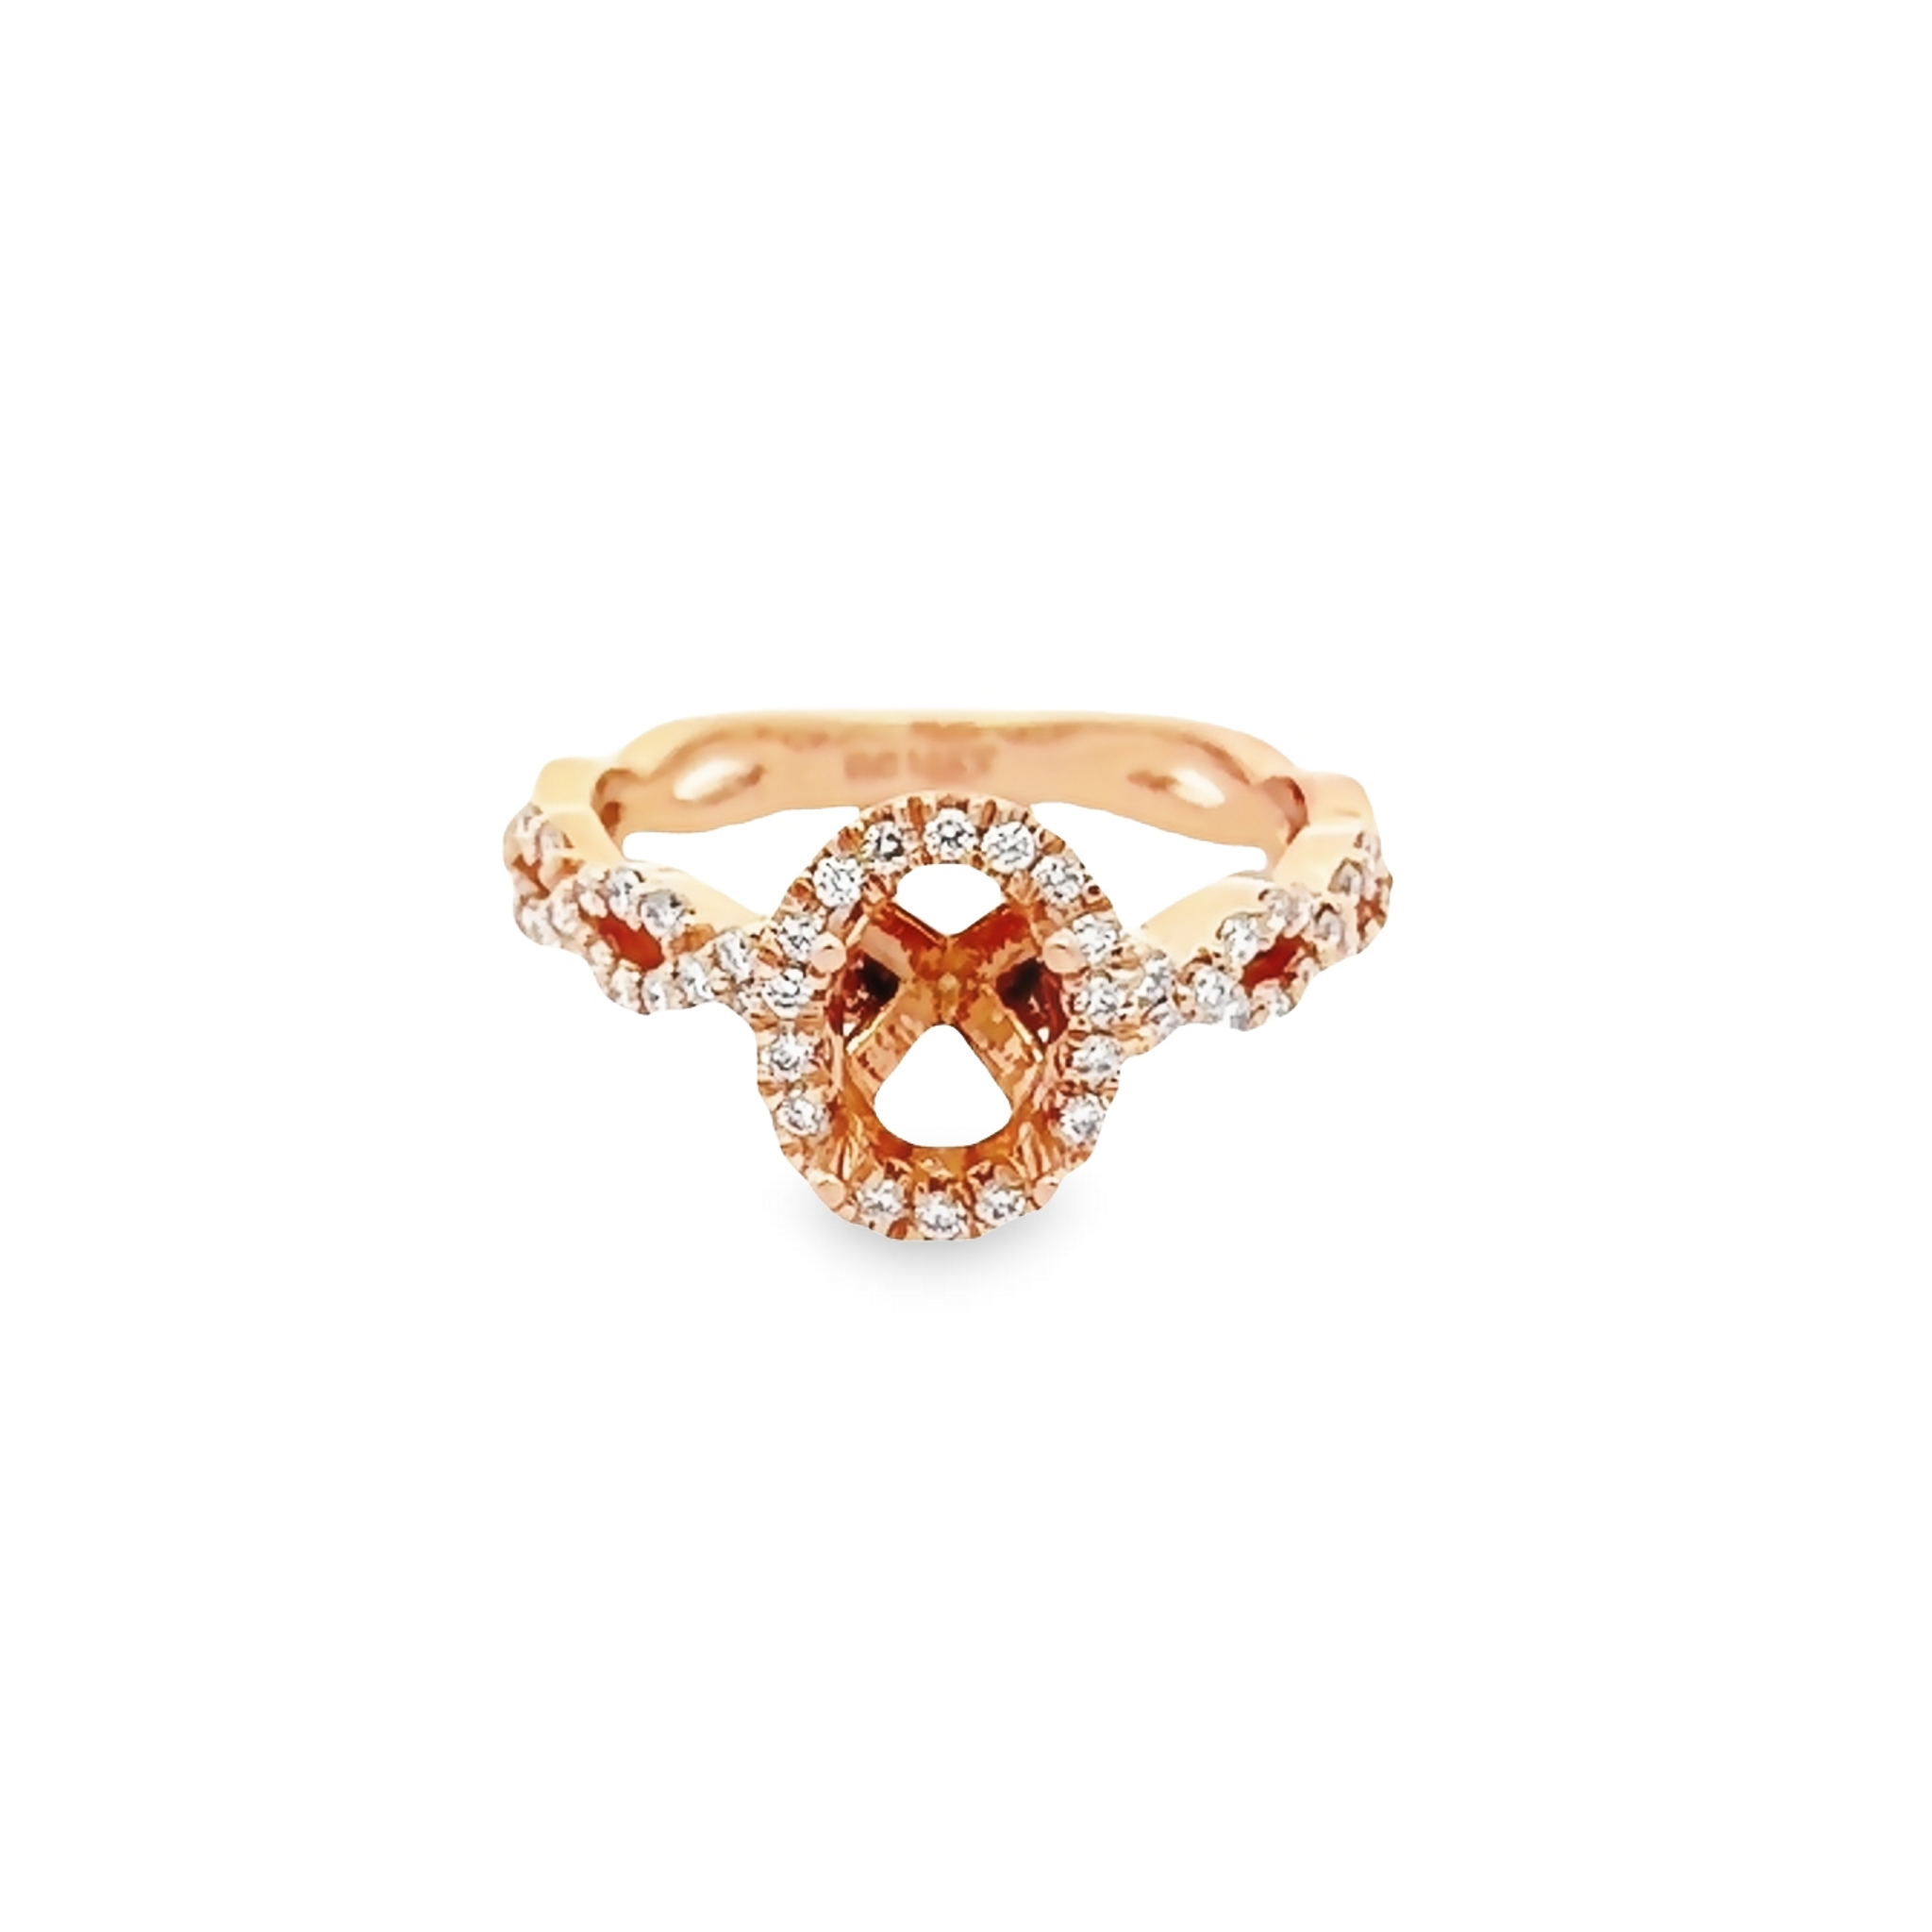 14 Karat Rose Gold Semi Mount Engagement Ring With 50=0.38 Total Weight Round Brilliant G Vs Diamonds. Size 7.5